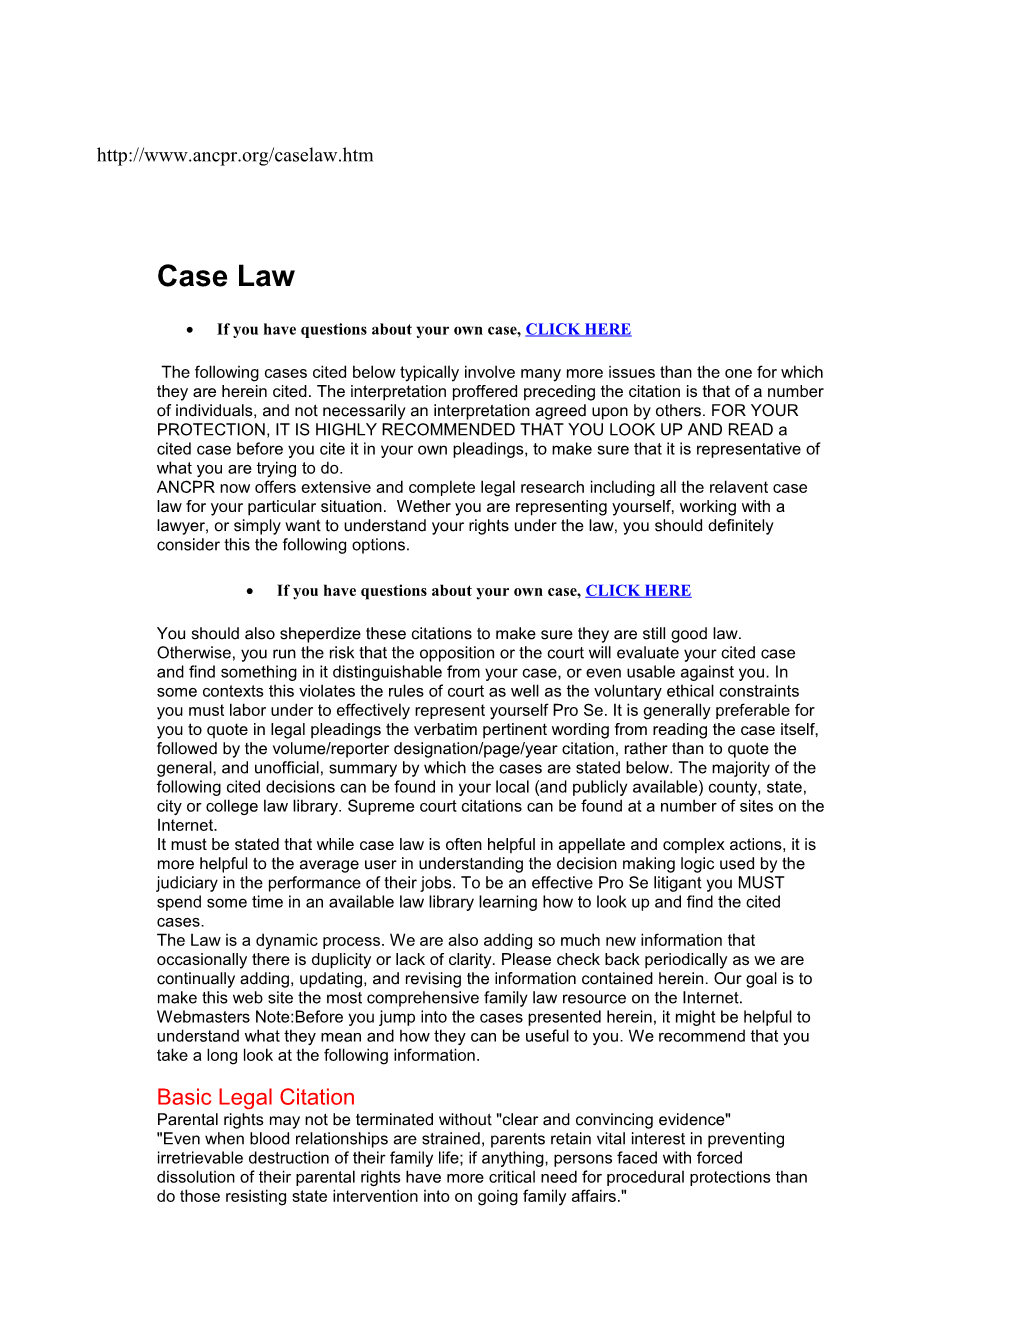 If You Have Questions About Your Own Case, CLICK HERE